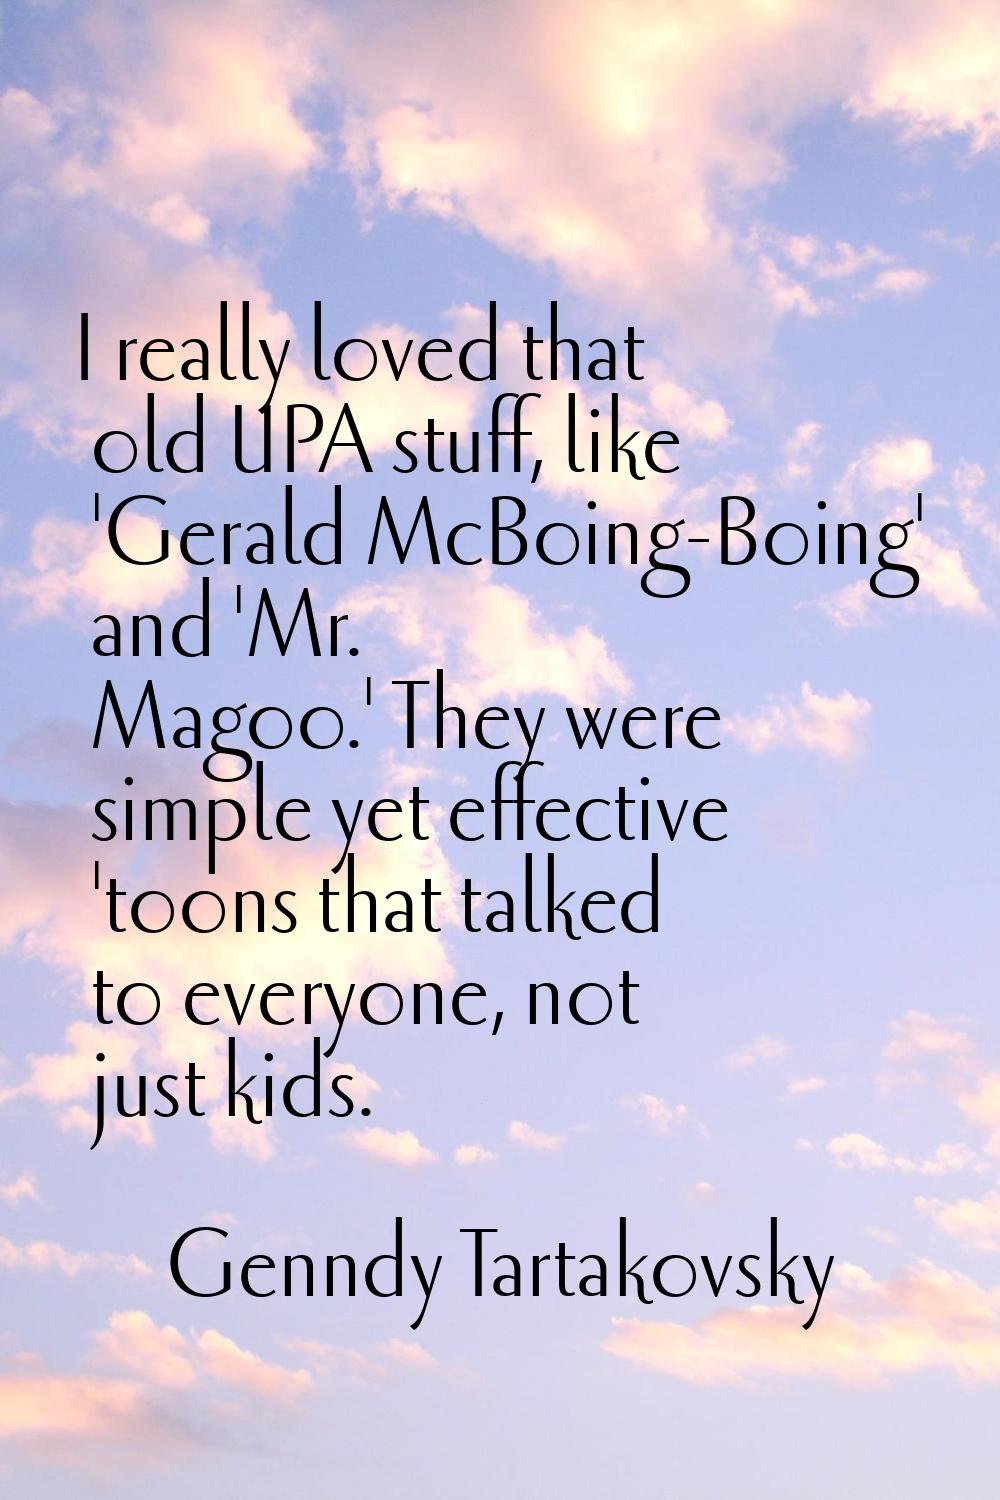 I really loved that old UPA stuff, like 'Gerald McBoing-Boing' and 'Mr. Magoo.' They were simple ye